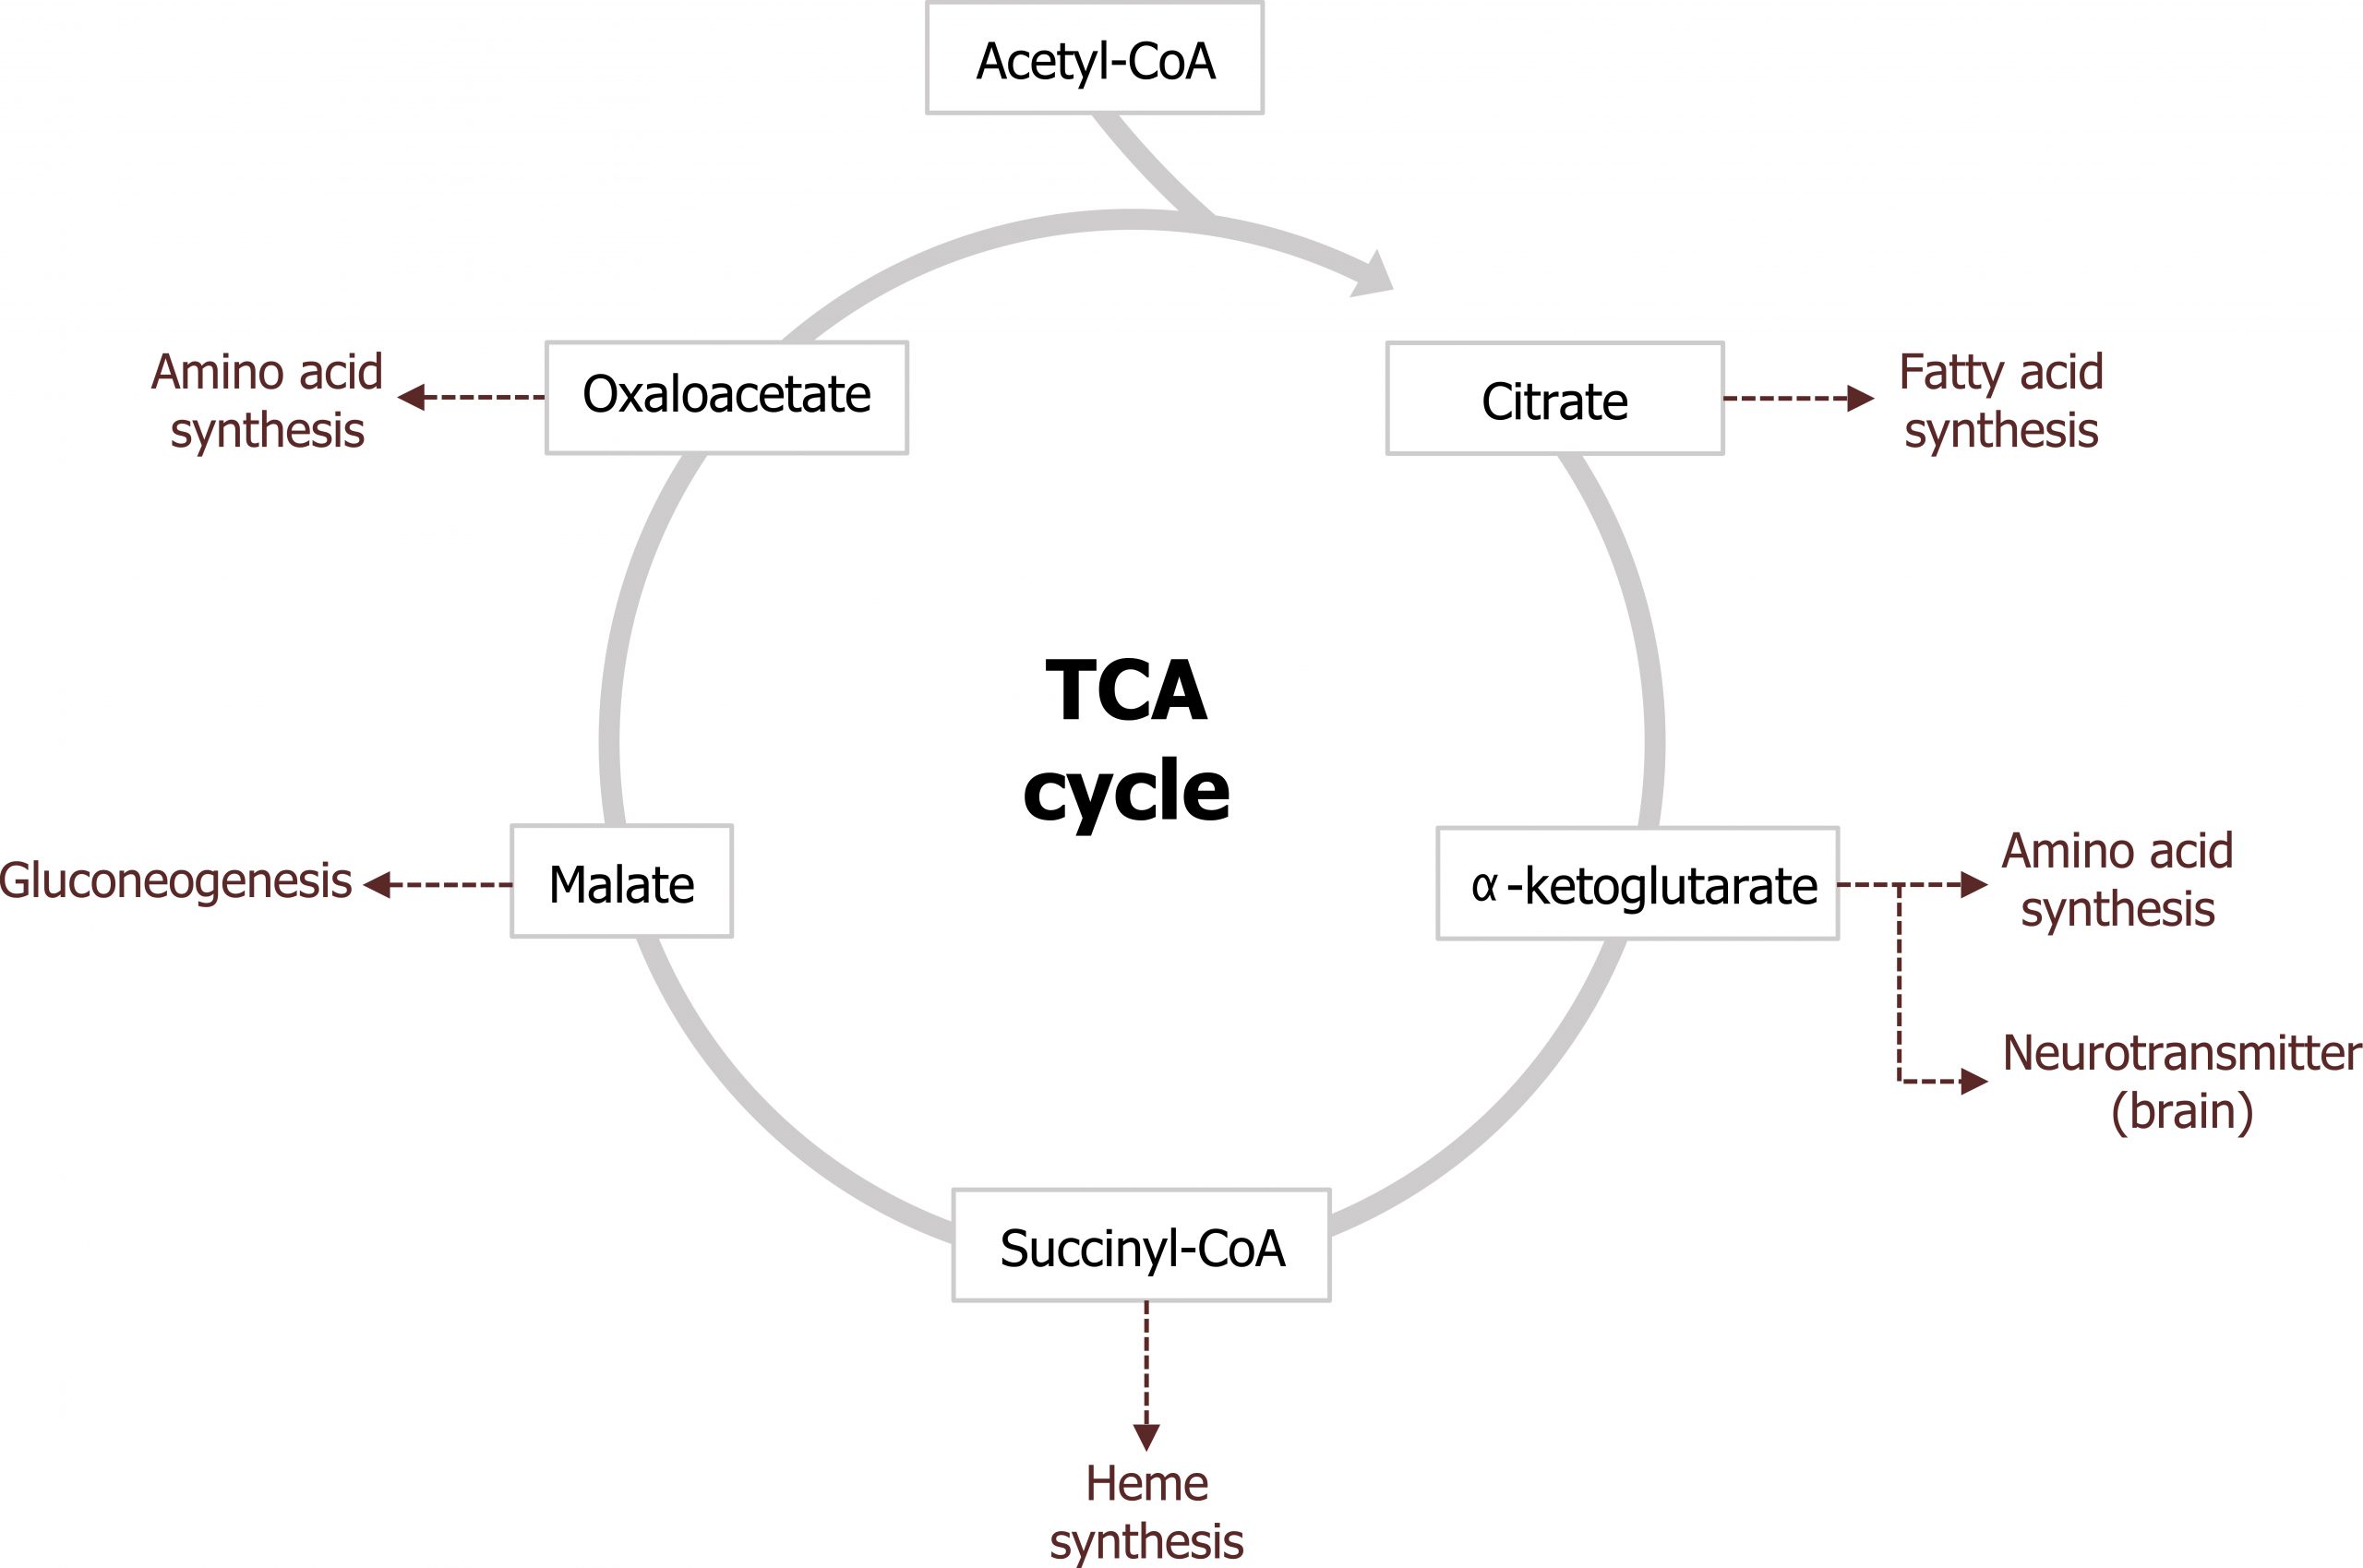 Acetyl-CoA enters the TCA cycle arrow citrate arrow α-ketoglutarate arrow succinyl-CoA arrow malate arrow oxaloacetate arrow citrate. Citrate arrow fatty acid synthesis. Α-ketoglutarate arrow amino acid synthesis and neurotransmitter (brain). Succinyl-CoA arrow heme synthesis. Malate arrow gluconeogenesis. Oxaloacetate arrow amino acid synthesis.